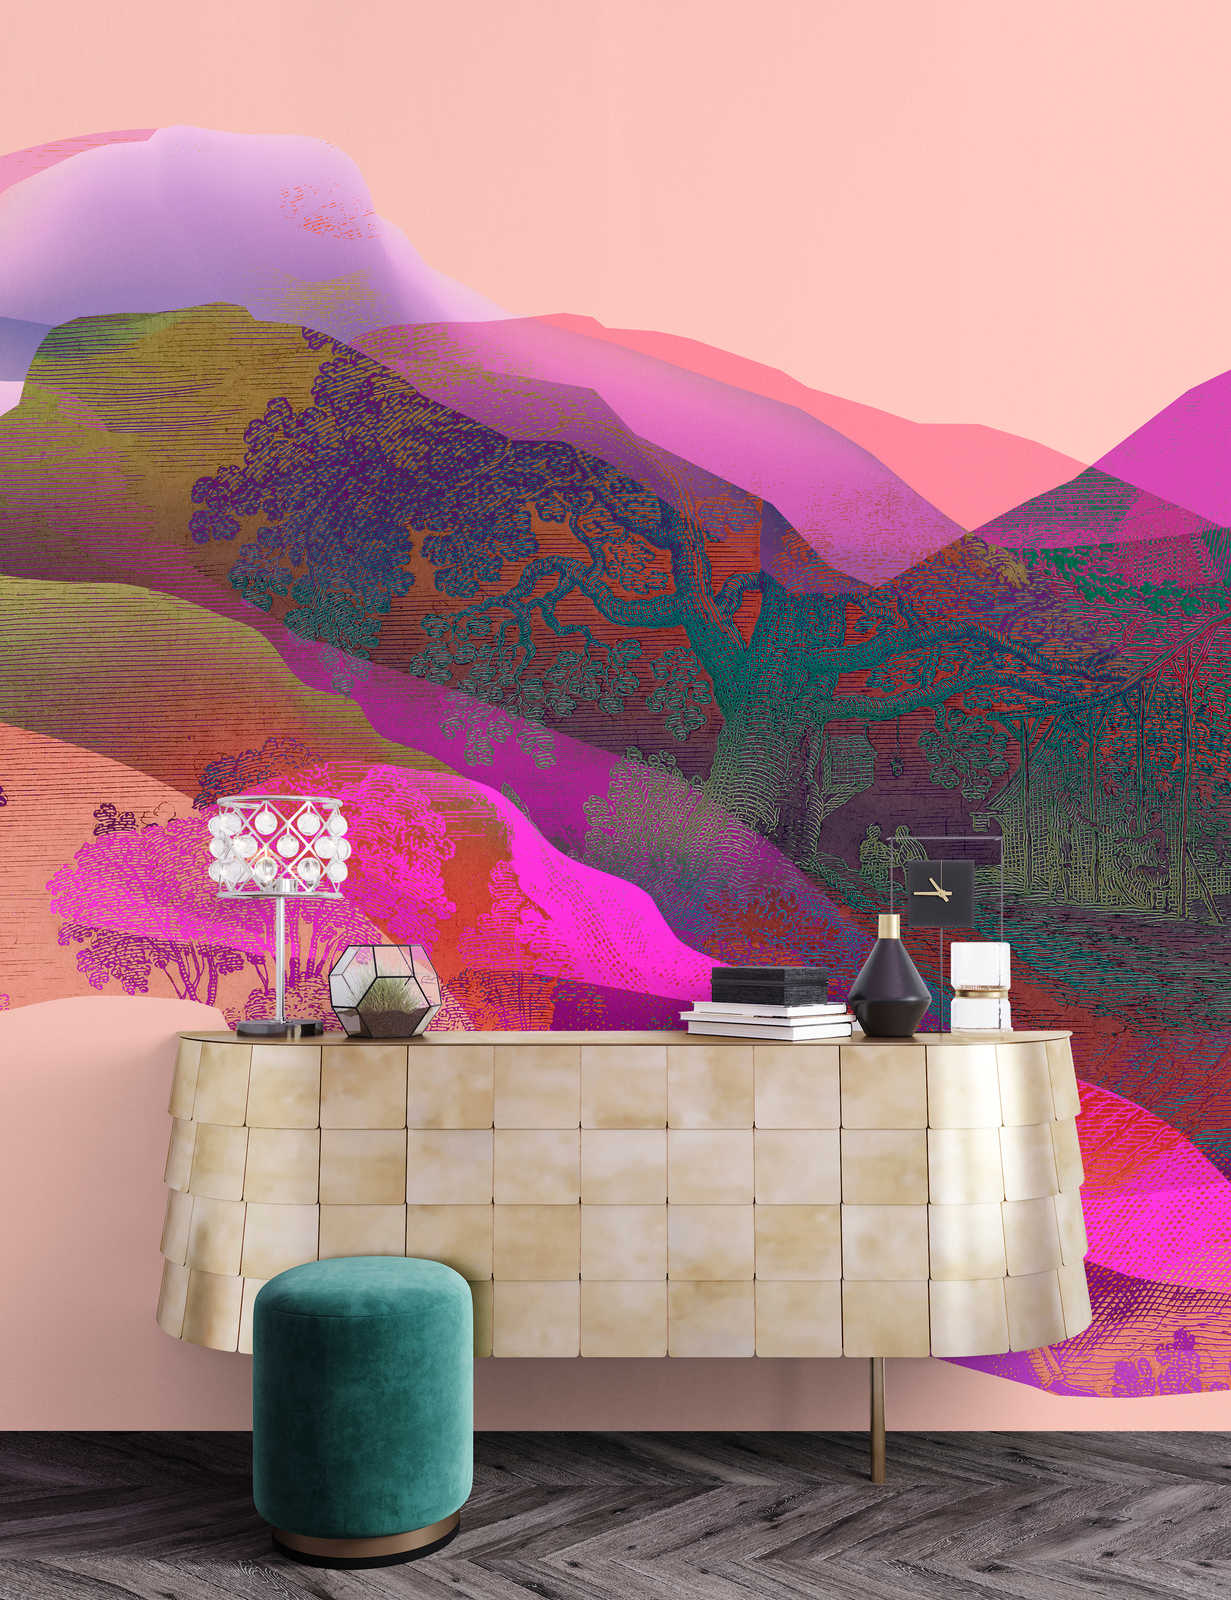             Magic Mountain 1 - mural abstract with mountains & landscape pattern
        